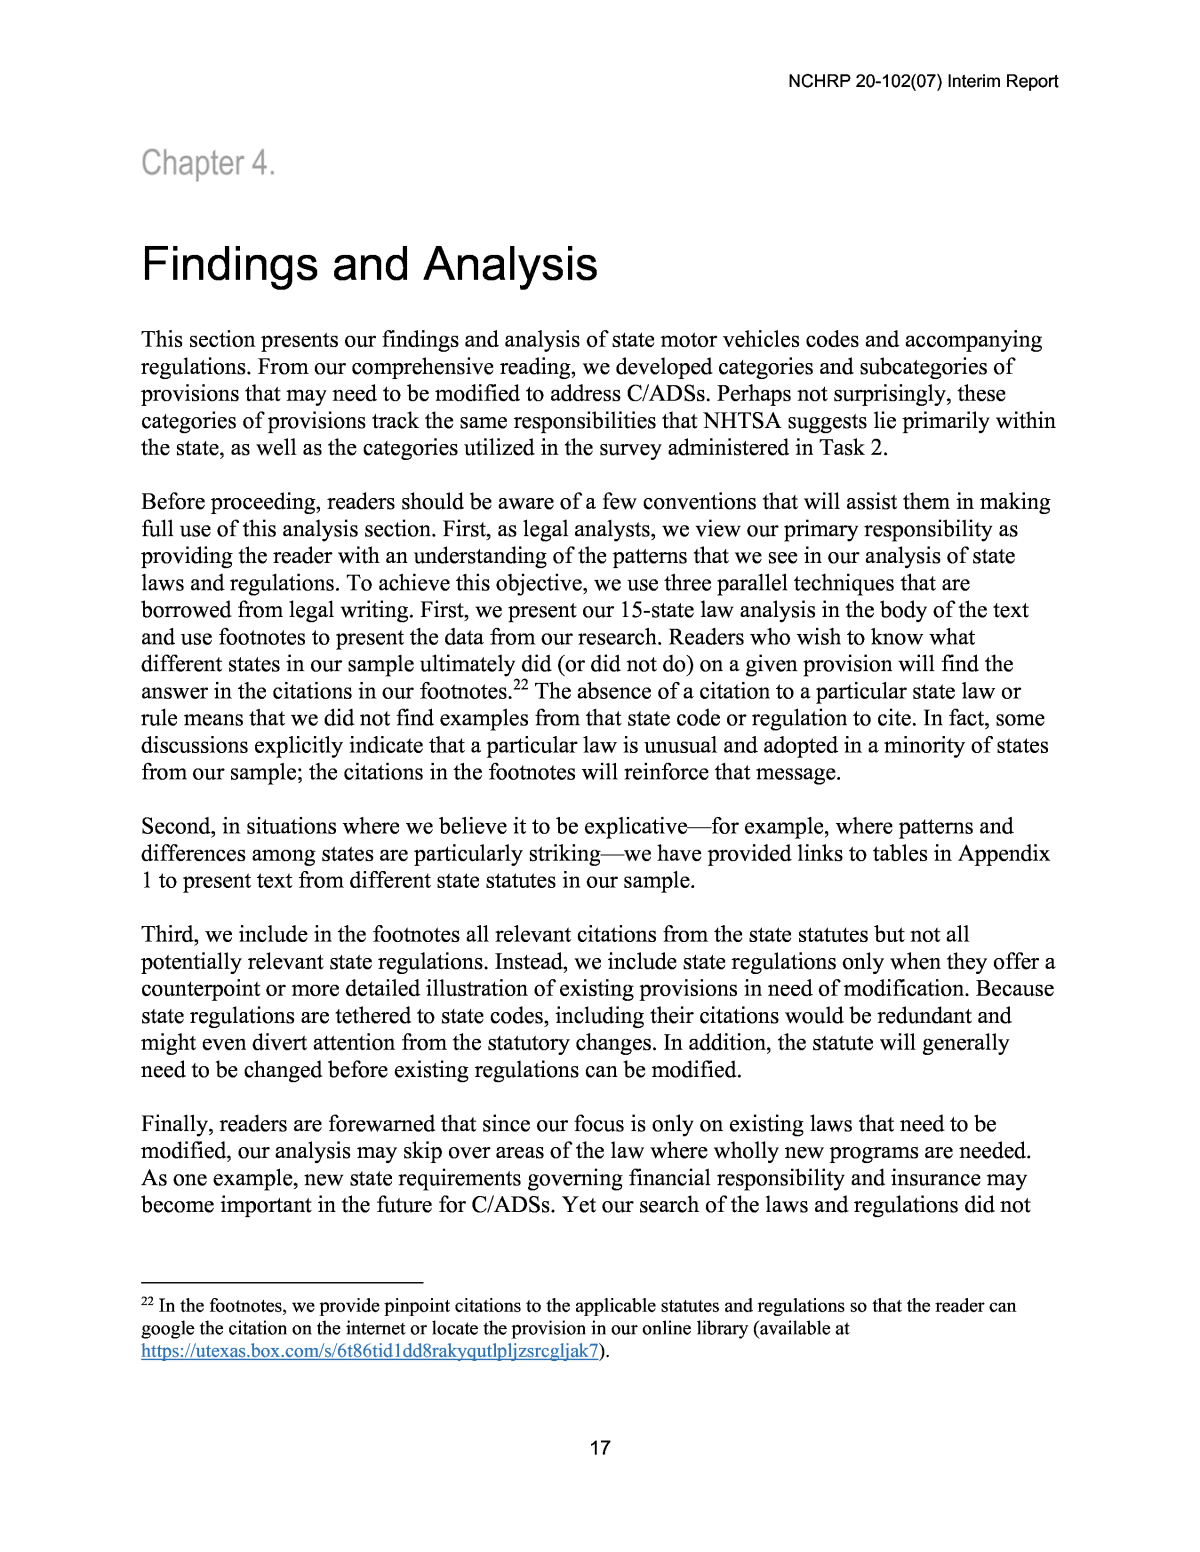 dissertation findings and analysis chapter example